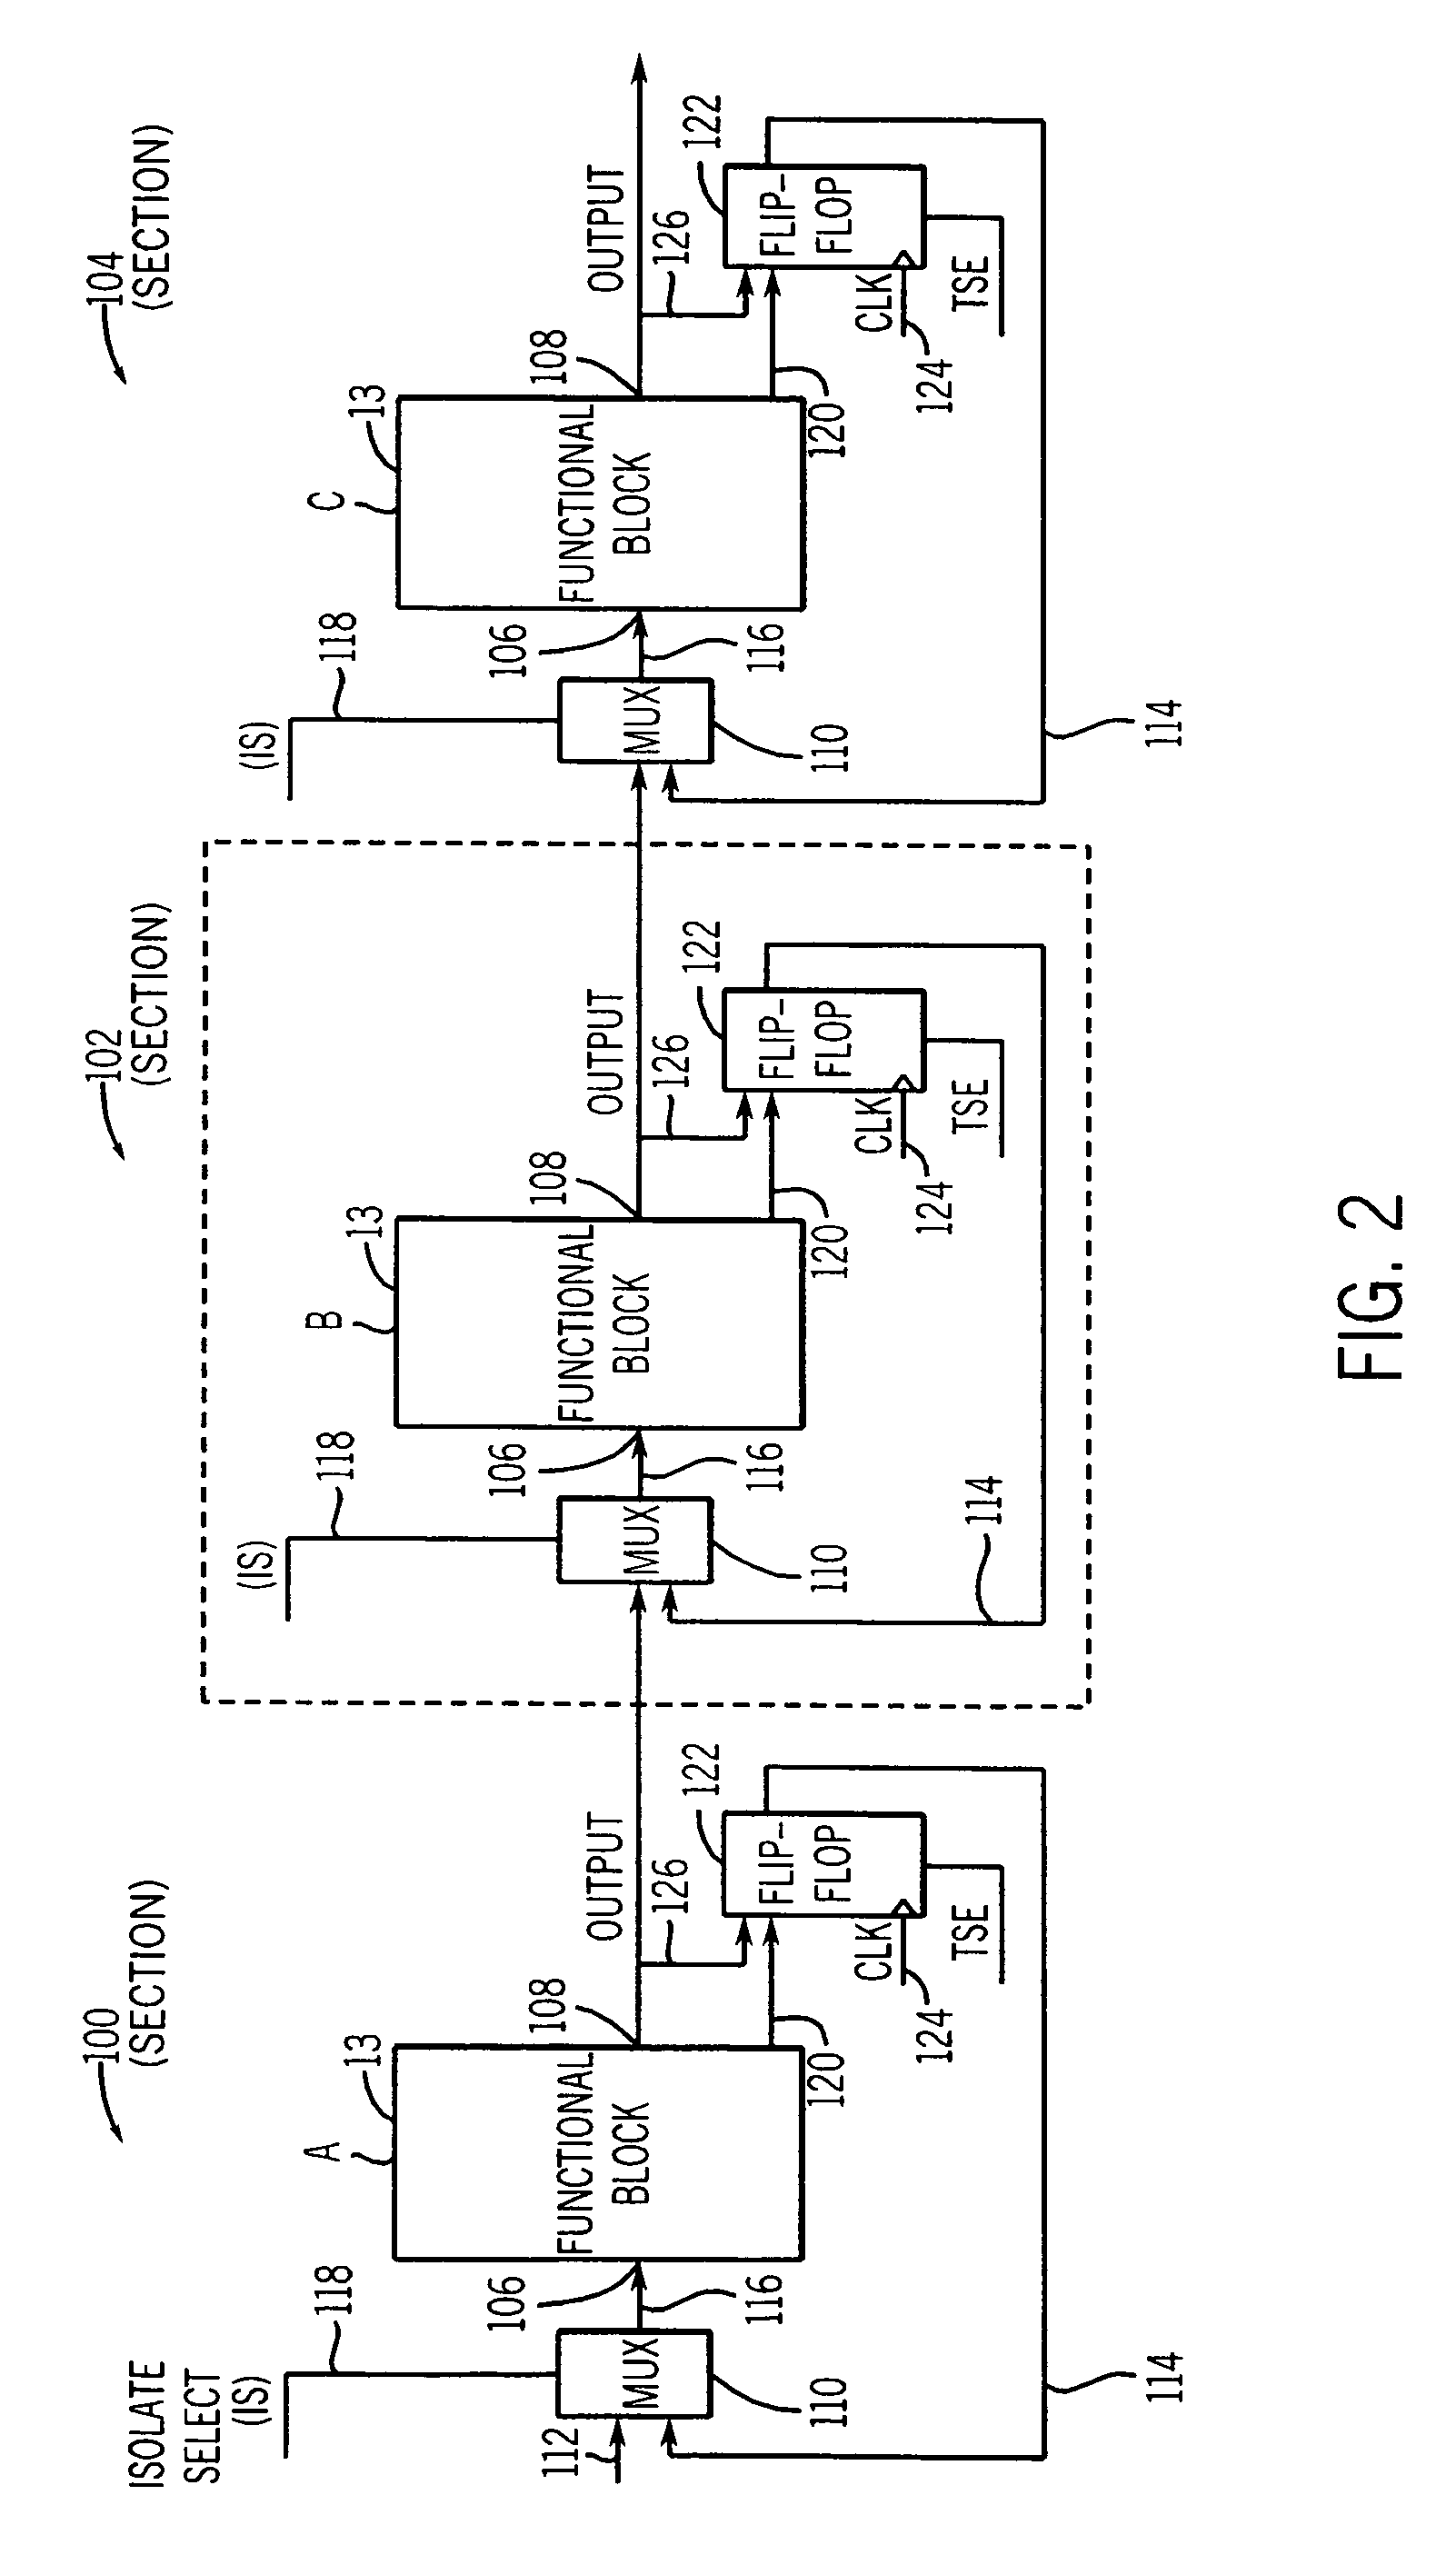 Method and system for partial-scan testing of integrated circuits